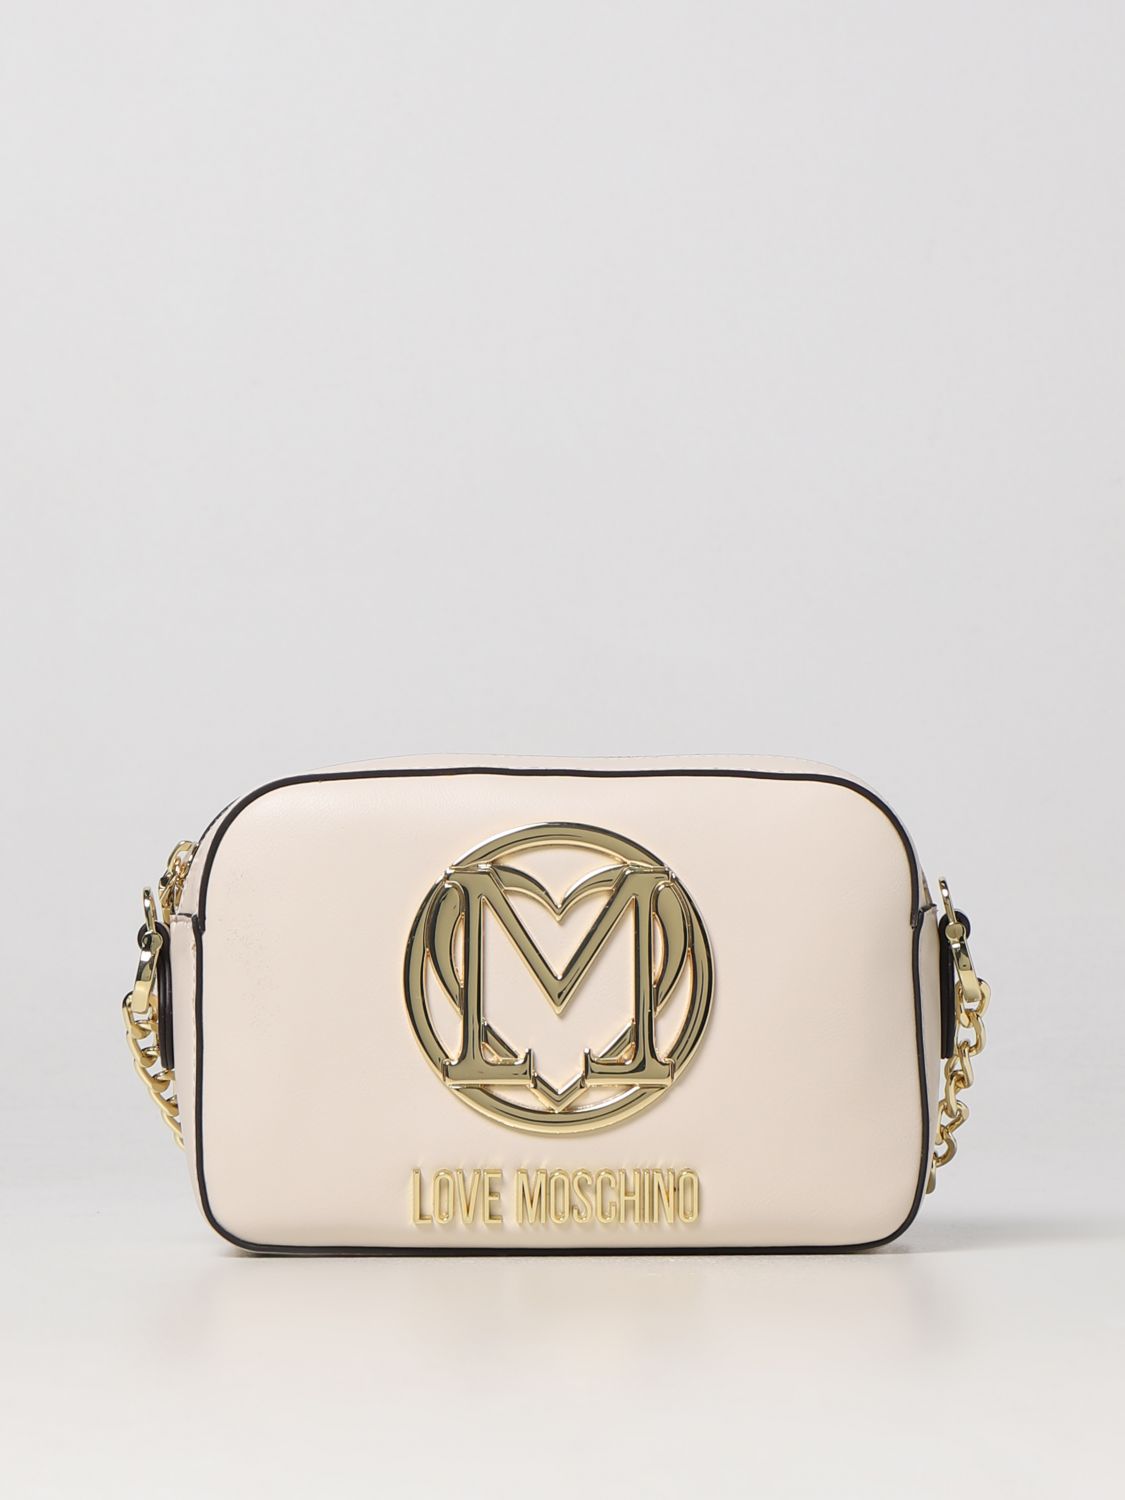 Metal Handle mini bag | Moschino Official Store